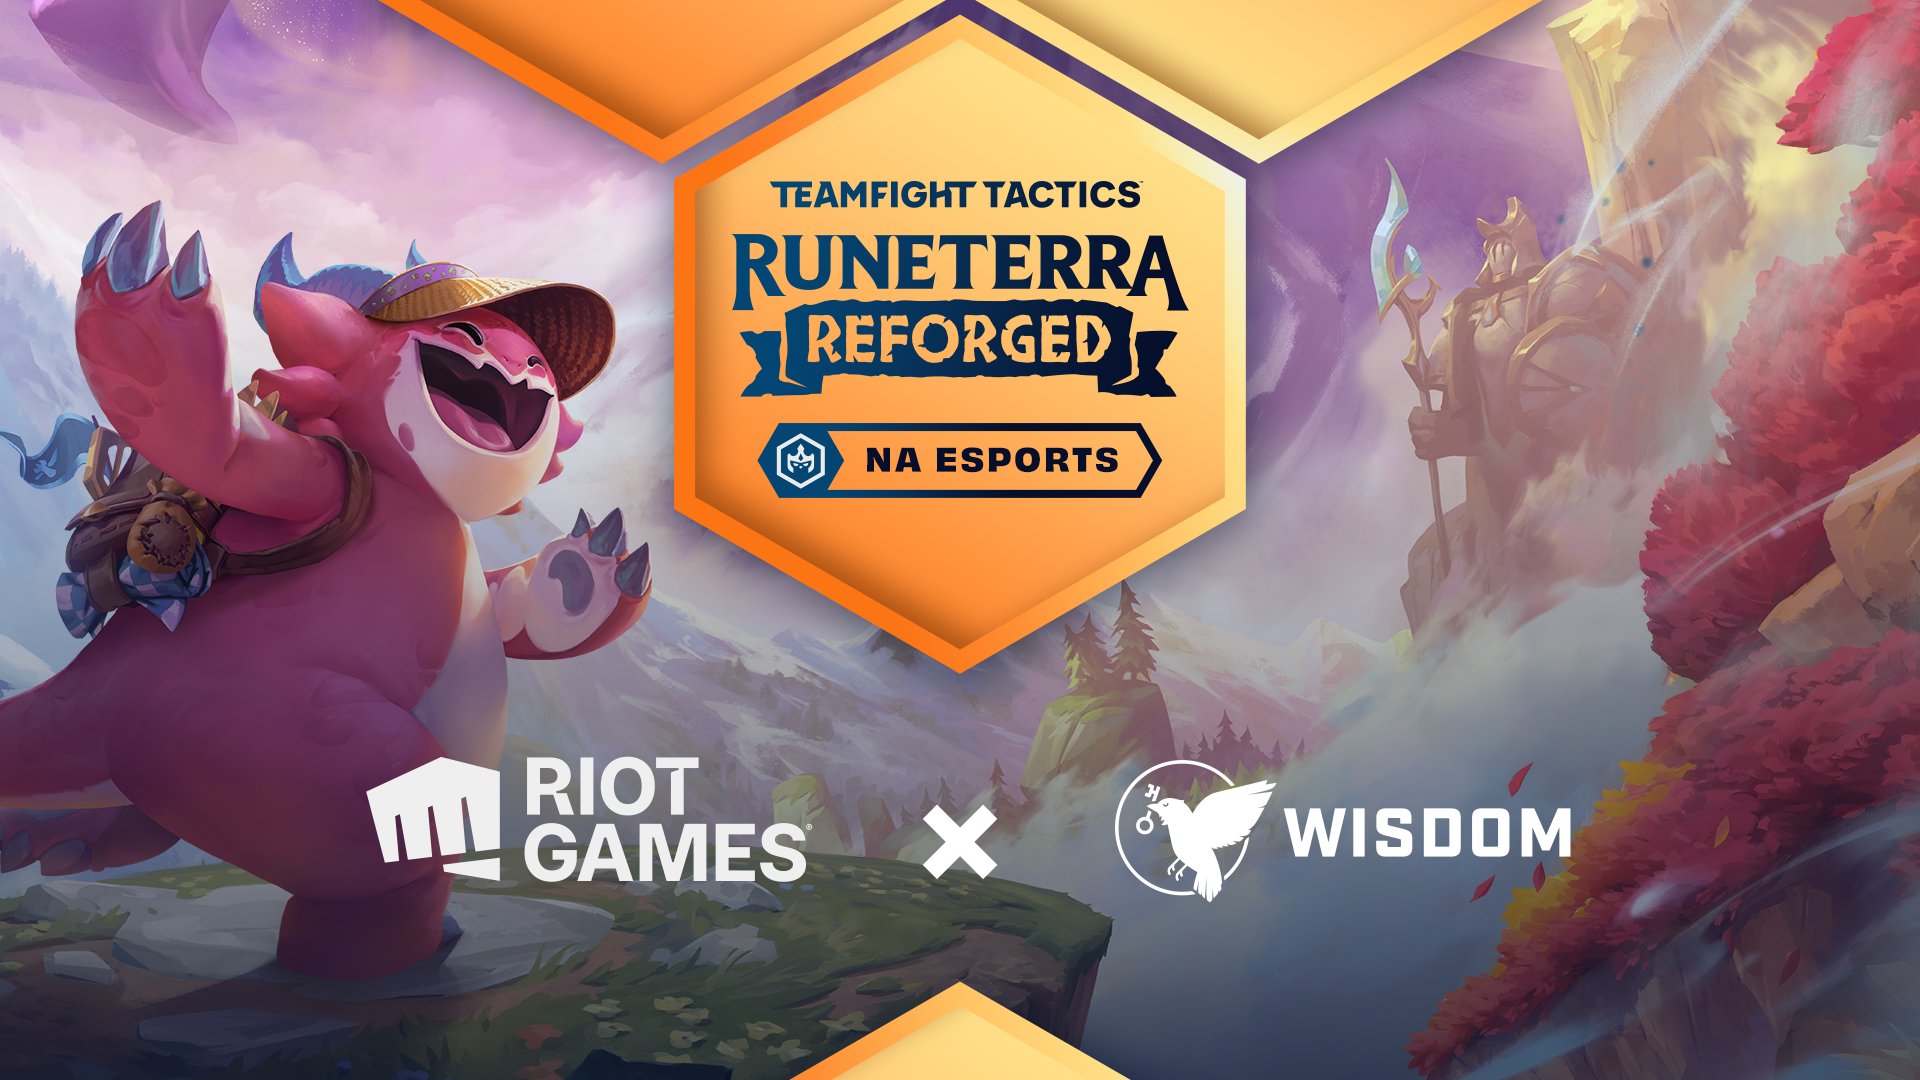 Upcoming TFT tournaments leading into the Runeterra Reforged